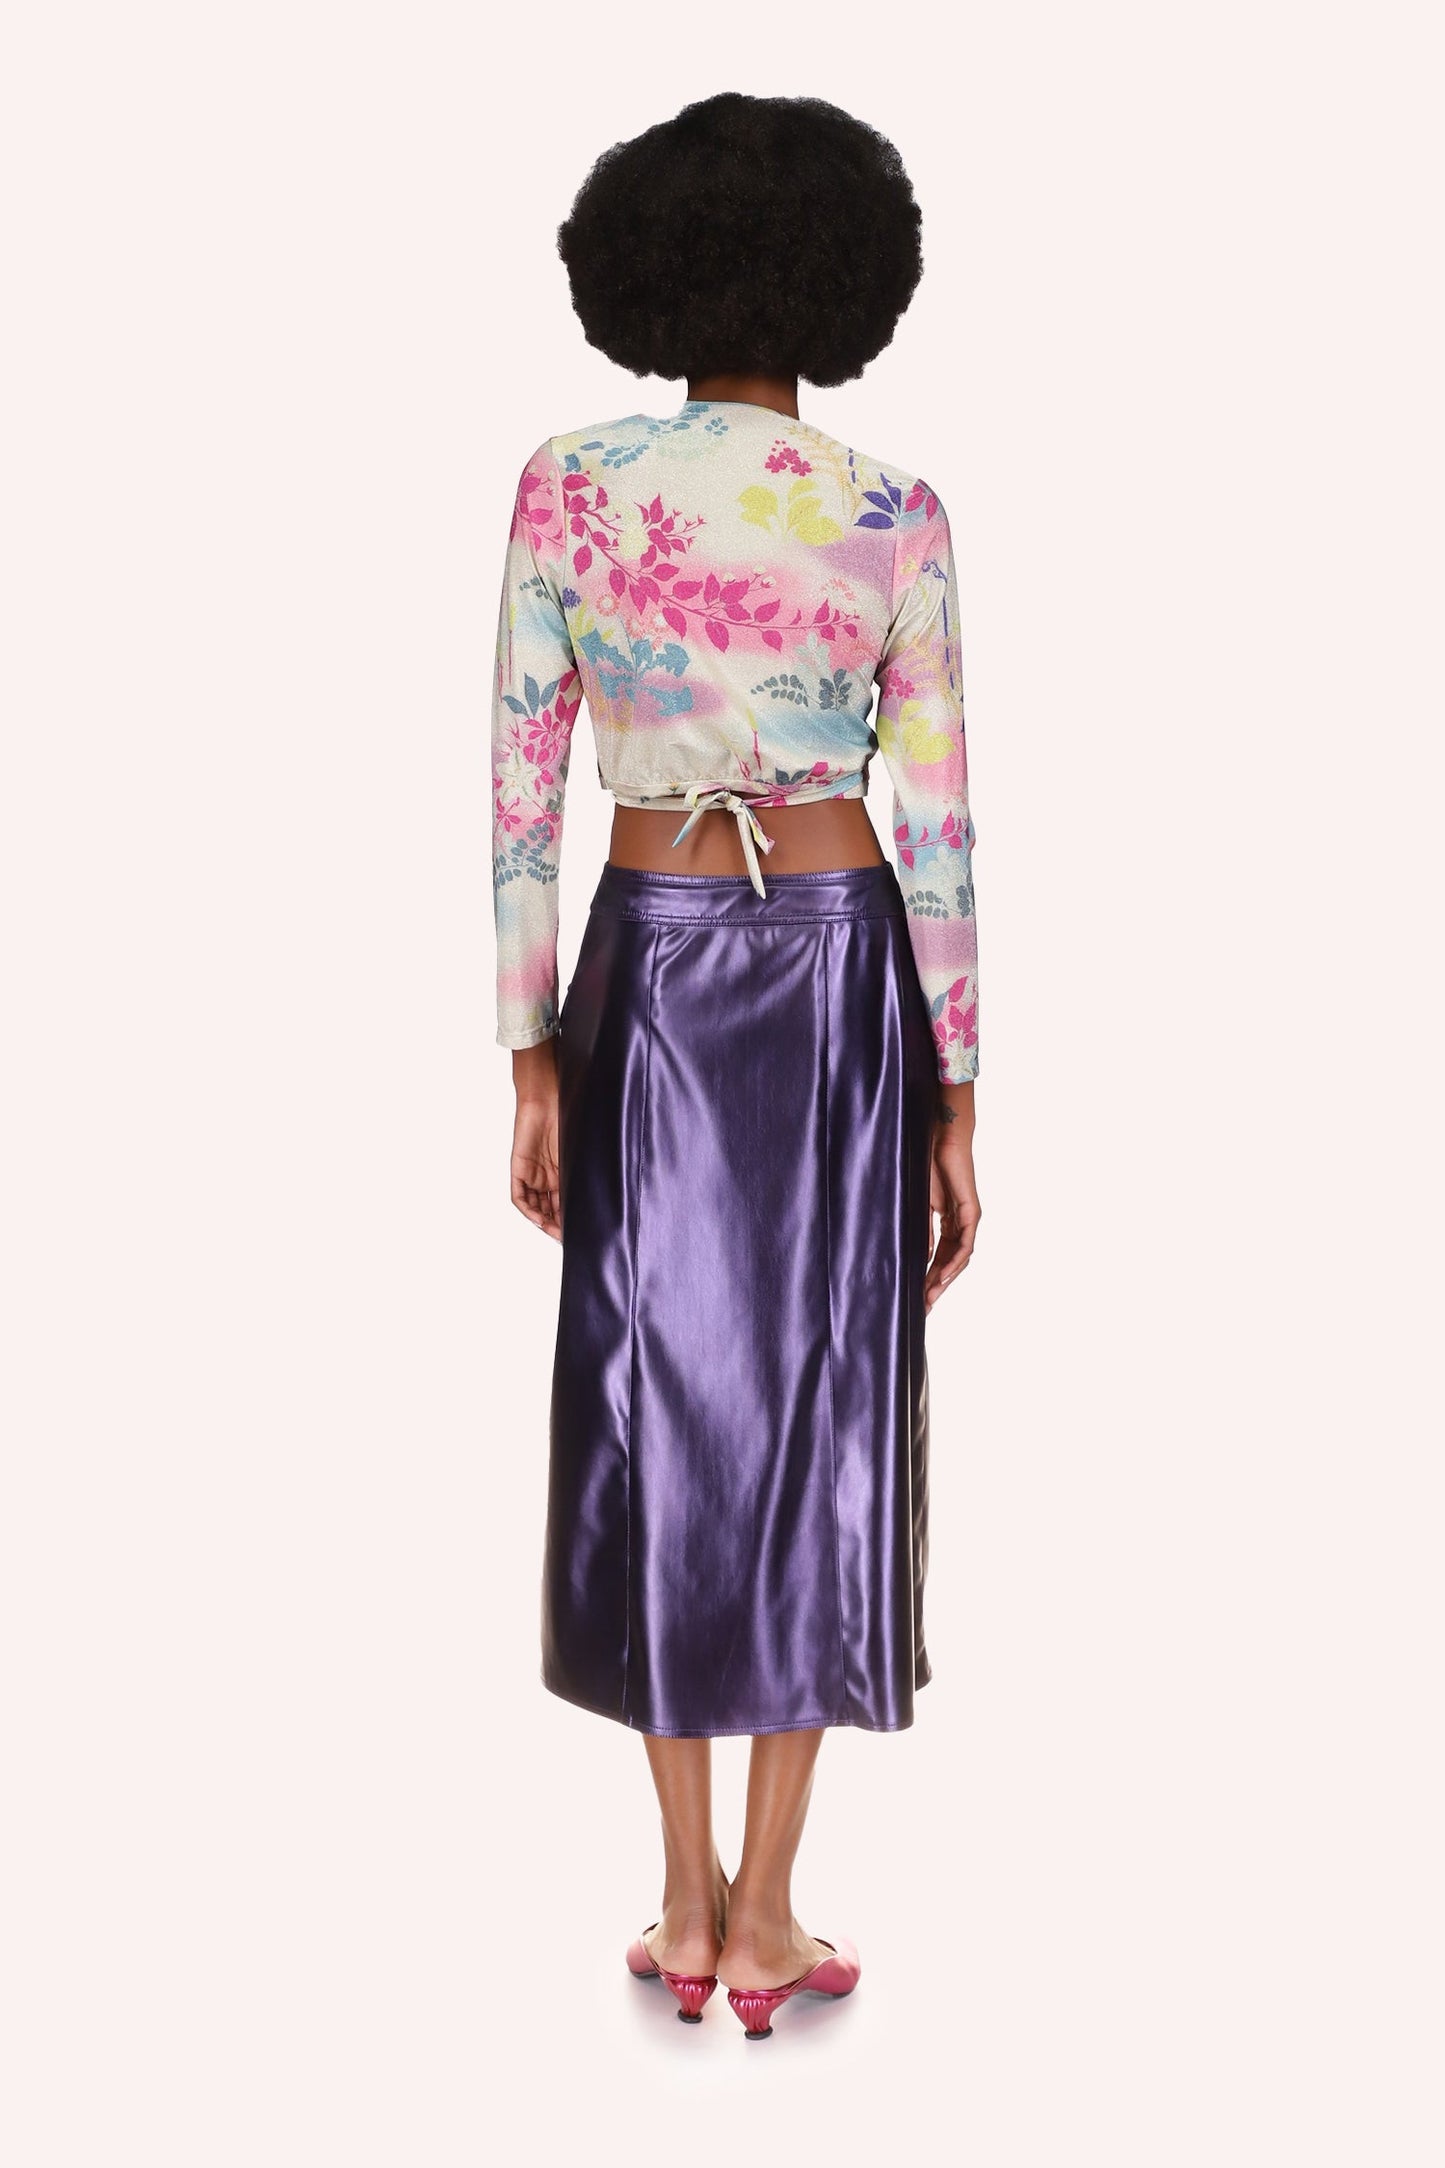 Atlantis Garden Wrap Top, tied in the back, beige and purple with Azalea floral design, long sleeves.